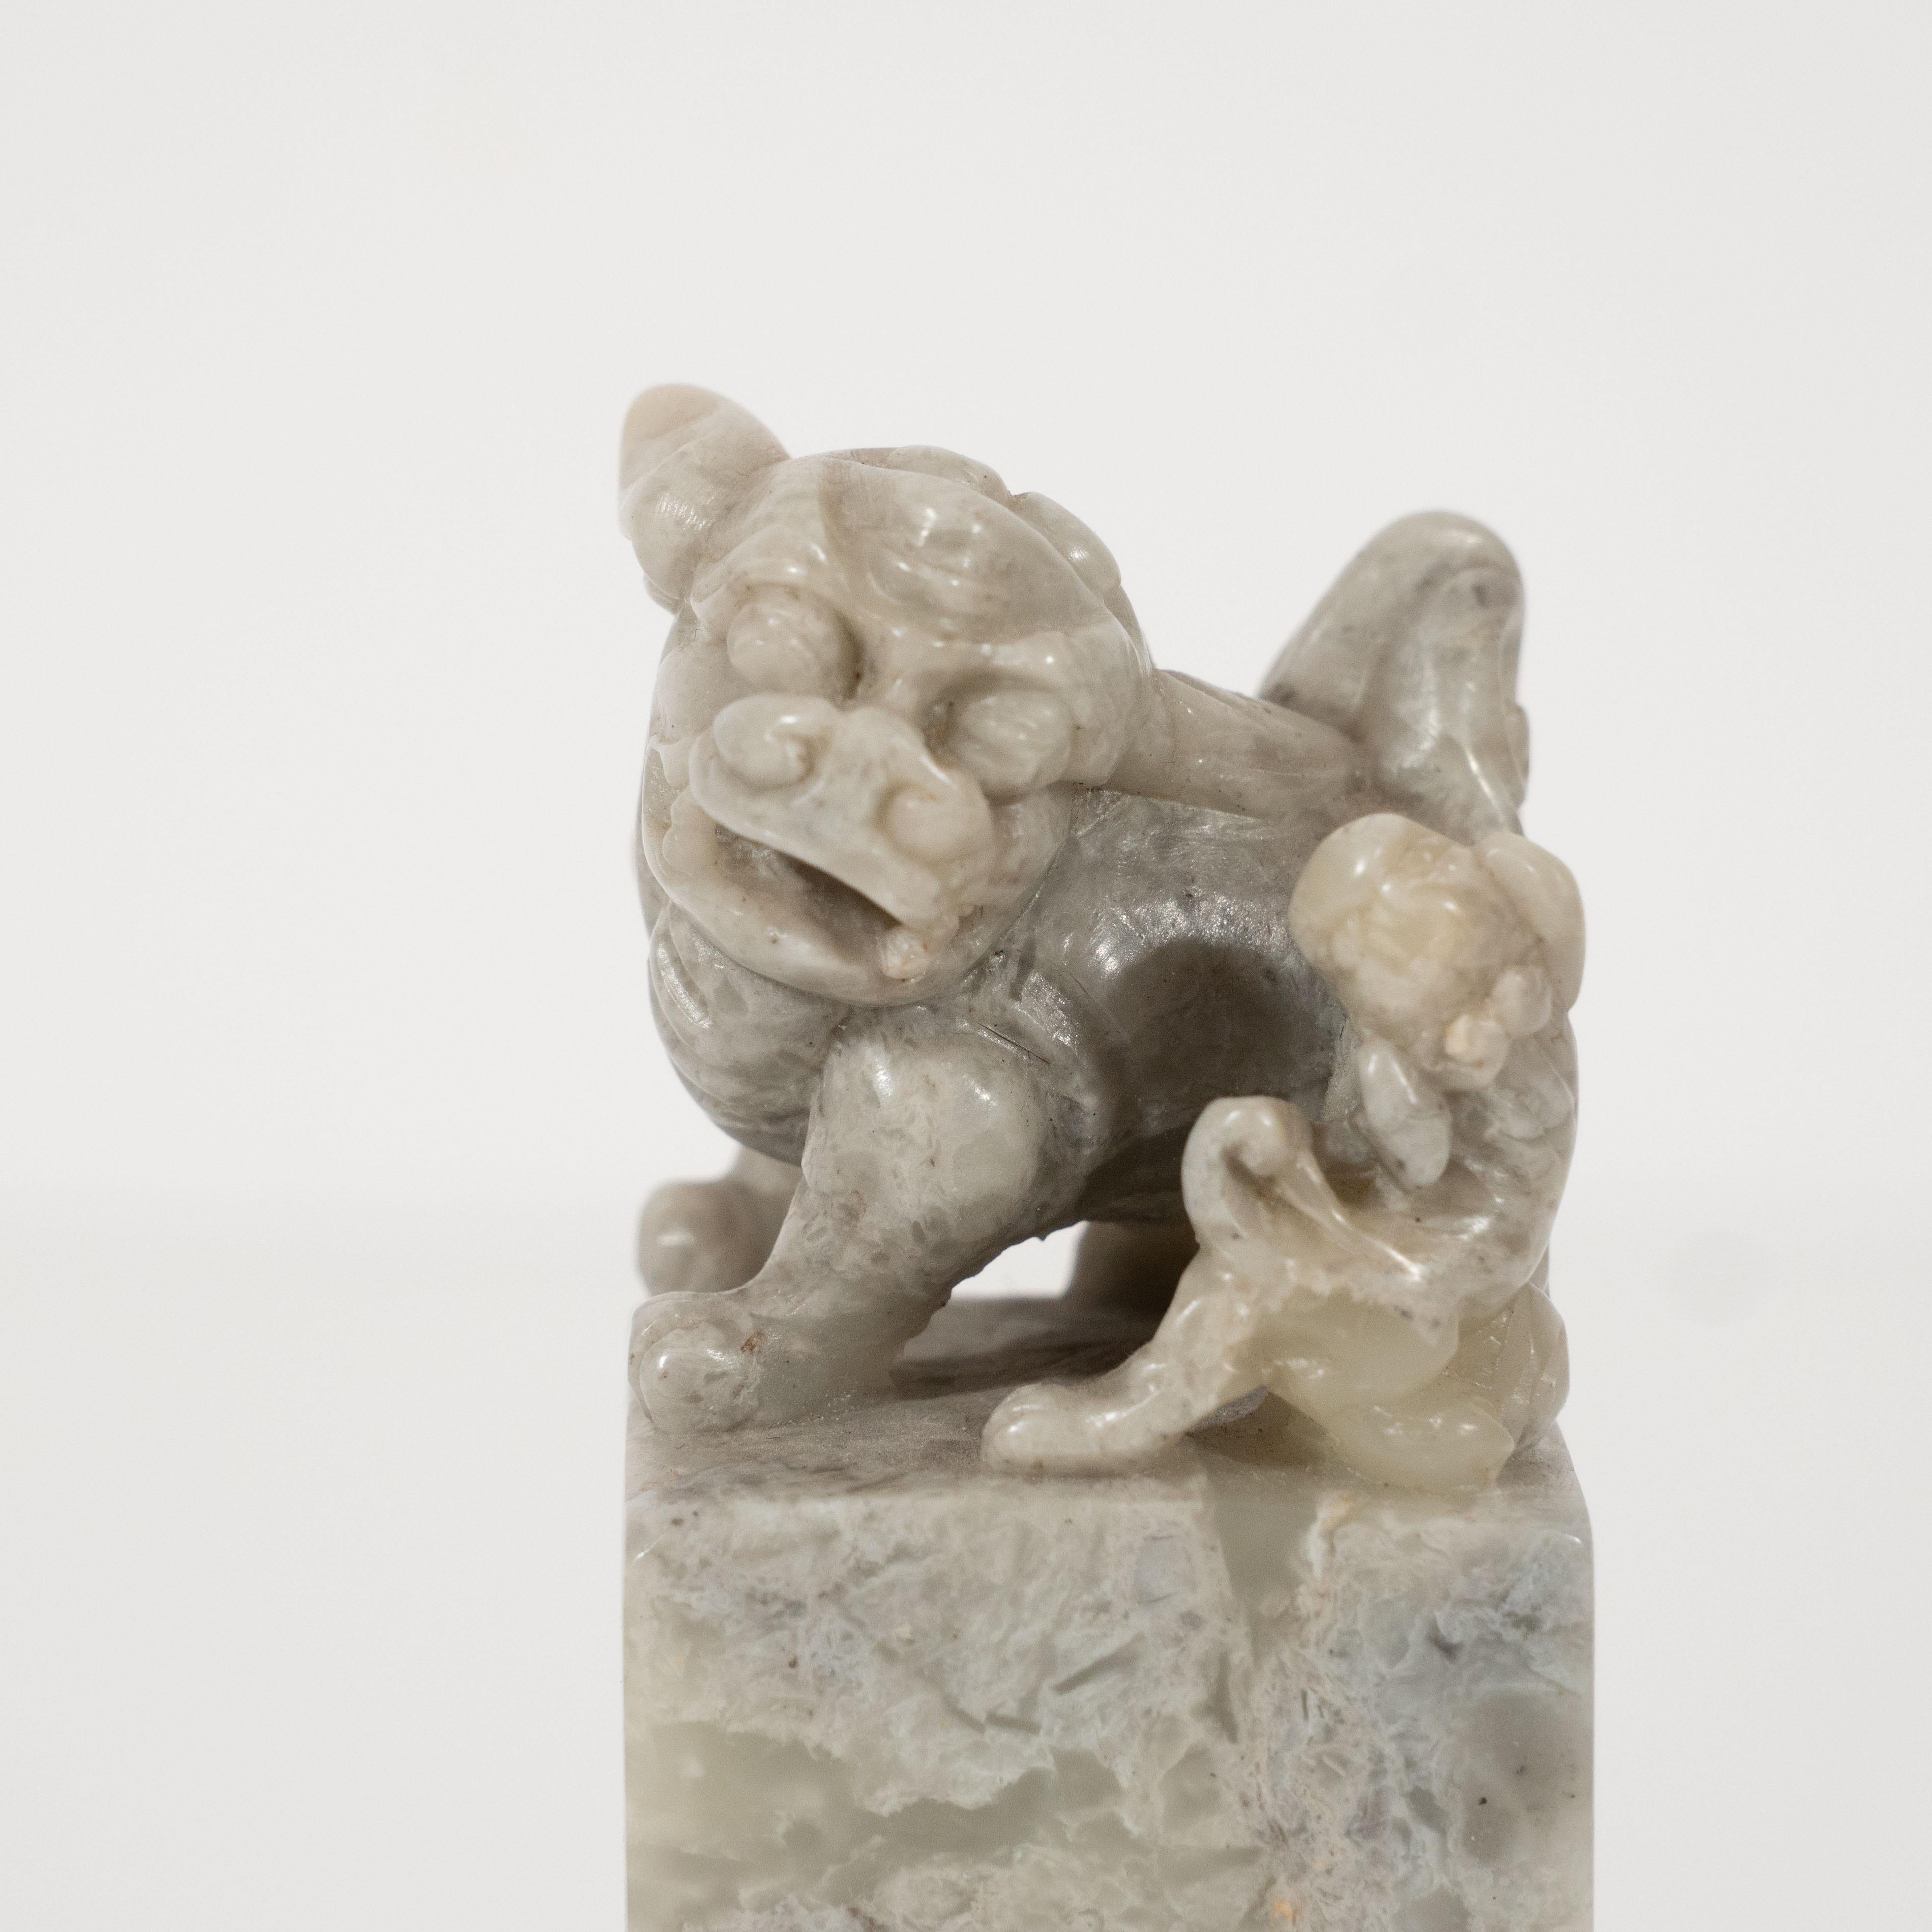 This beautiful Art Deco stamp was realized in China, circa 1925. It features a volumetric rectangular body crowned with a hand carved guardian lion (a Chinese leitmotif) and accompanying pup, climbing its hind leg- all realized in gray stone,